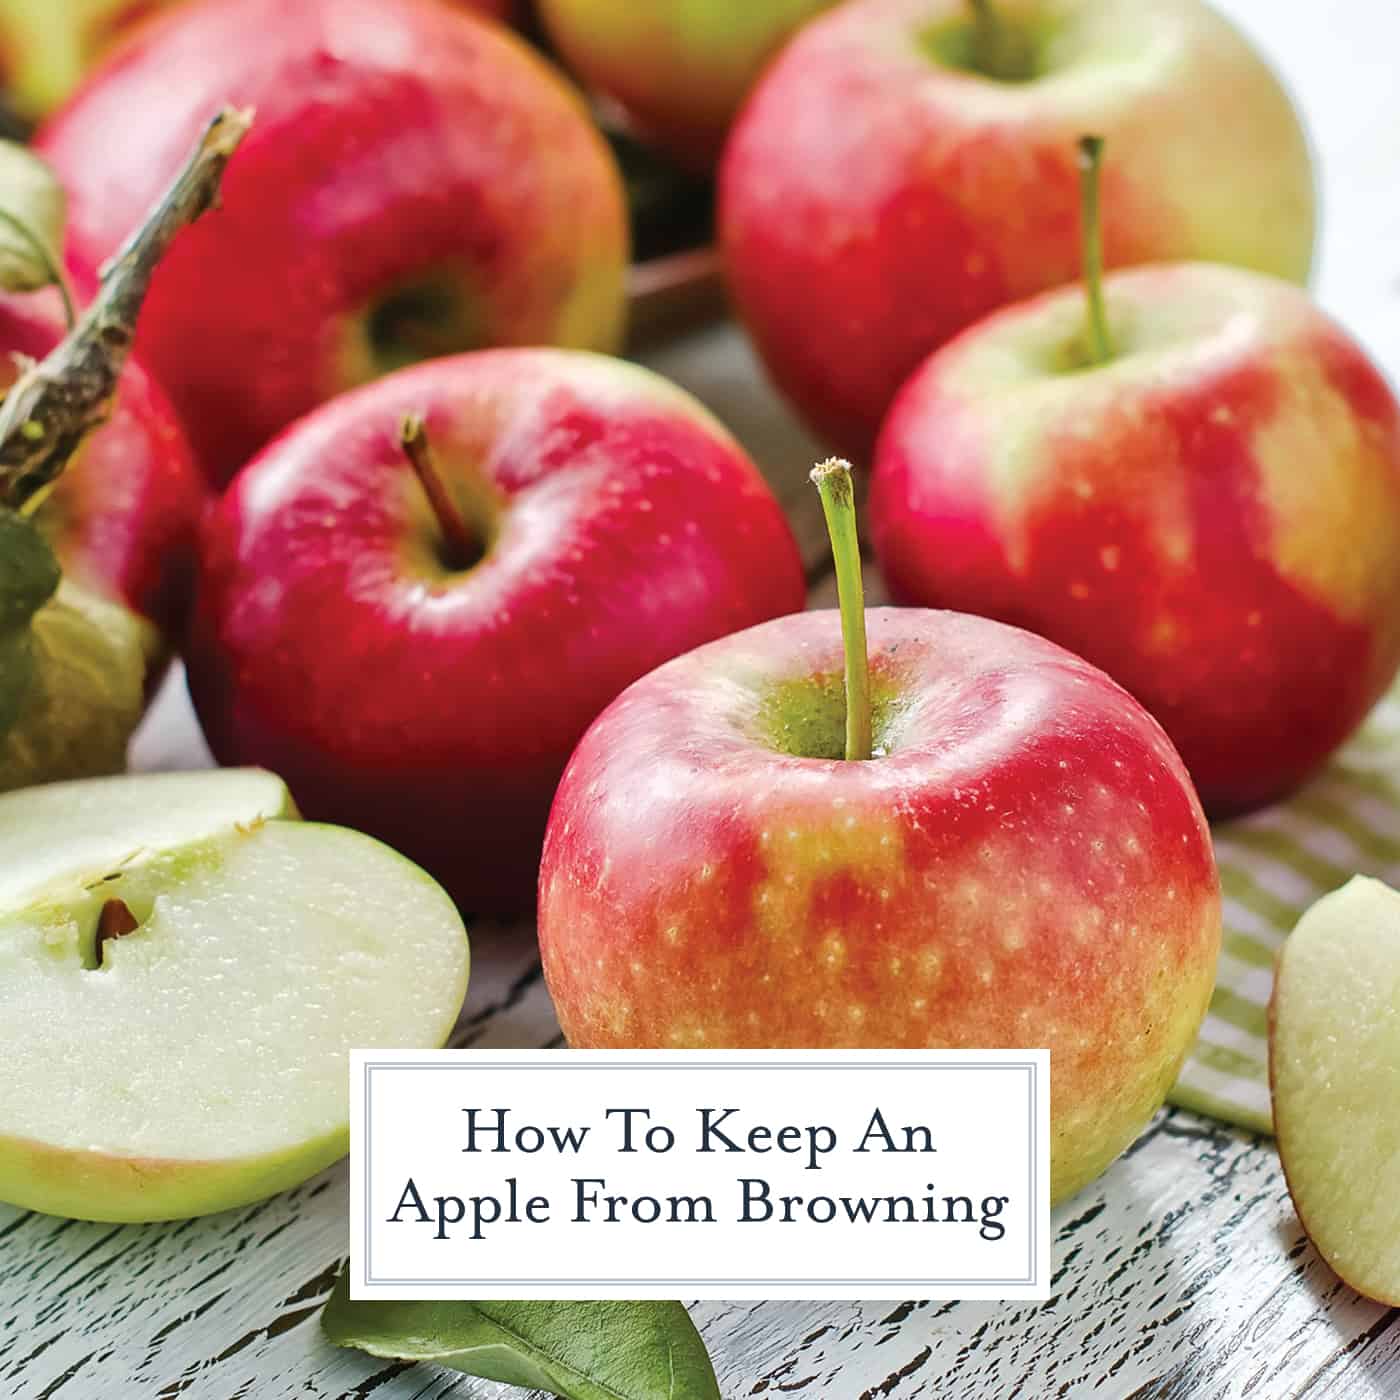 https://www.savoryexperiments.com/wp-content/uploads/2012/11/how-to-keep-an-apple-from-browning-FB.jpg